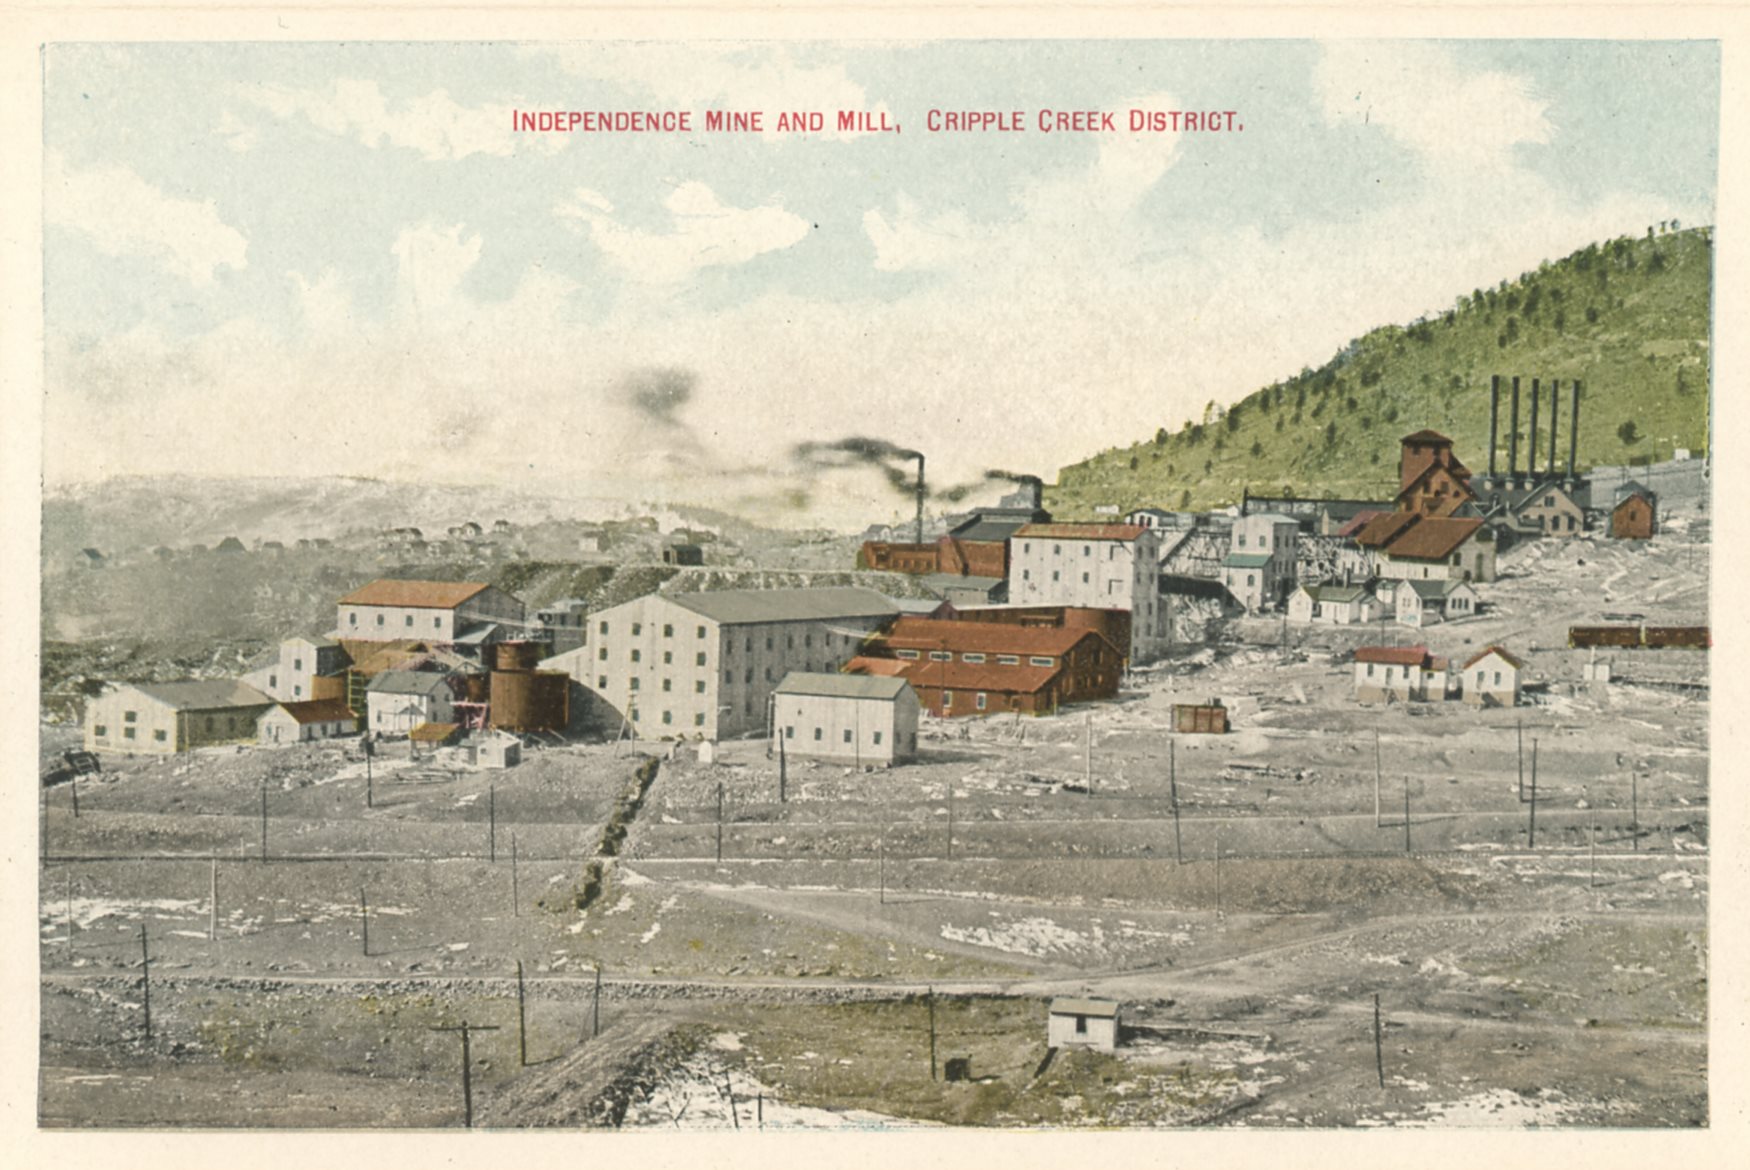 This image shows the immense large Independence Mill, which later was sold to the Portland Company and known then as the Portland Mill. But here it is the Independence Mill with the grades of the High Line/Short Line as the middle grade in front of the mill, in front of that grade is a road and in back - closest to the mill - is the grade of the Golden Circle track, a narrow gauge 3-foot railroad connected to the F. & C.C.